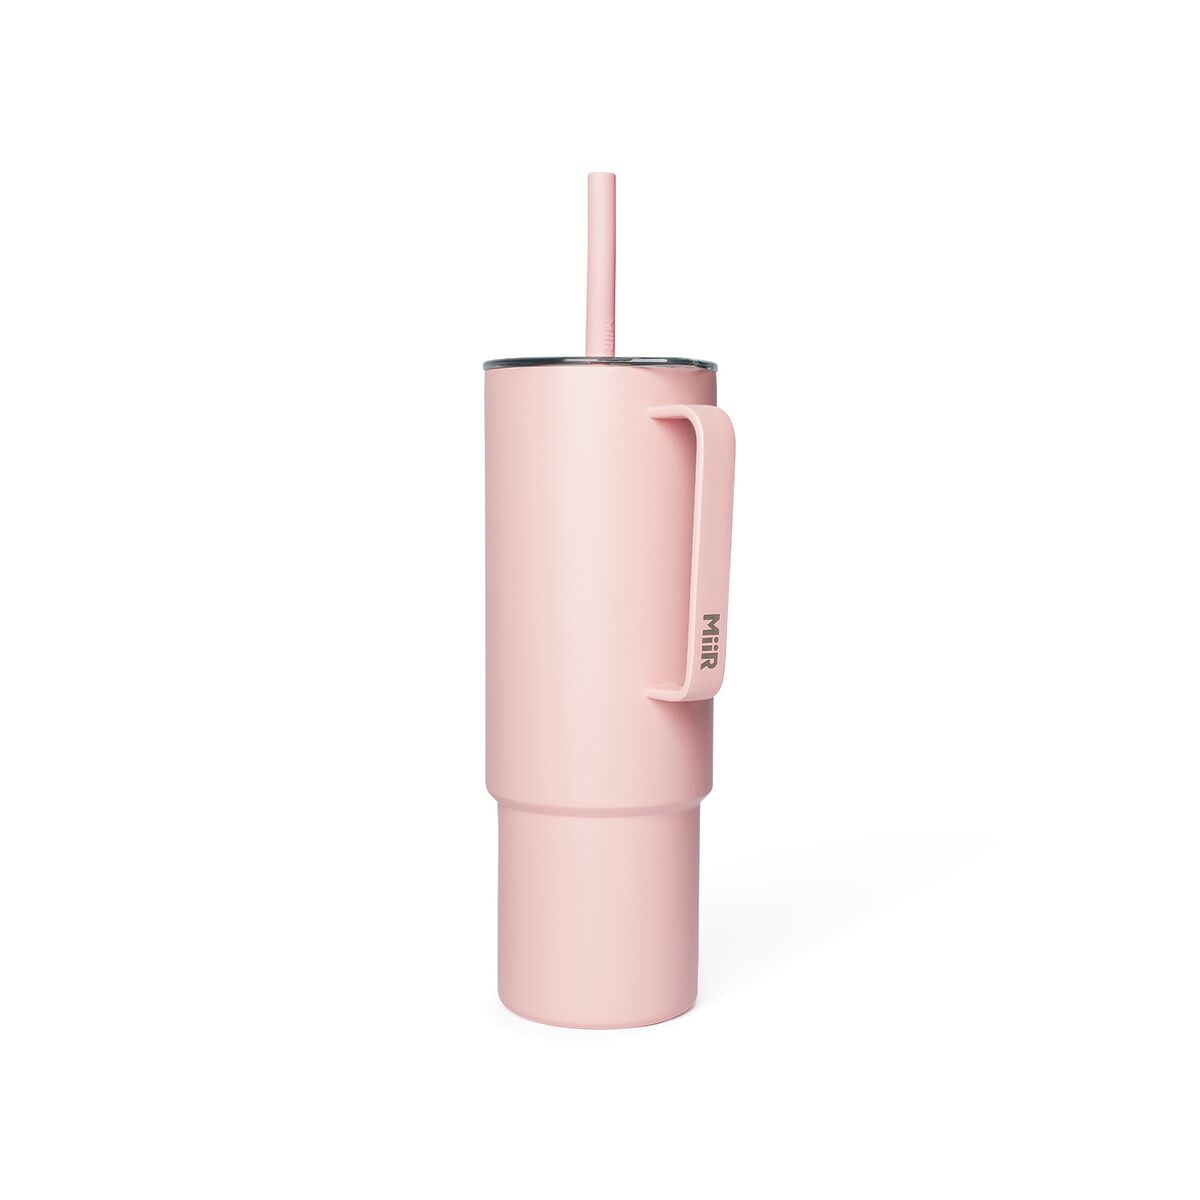 my-my™ Sippy Cup + Straw Cup Combo